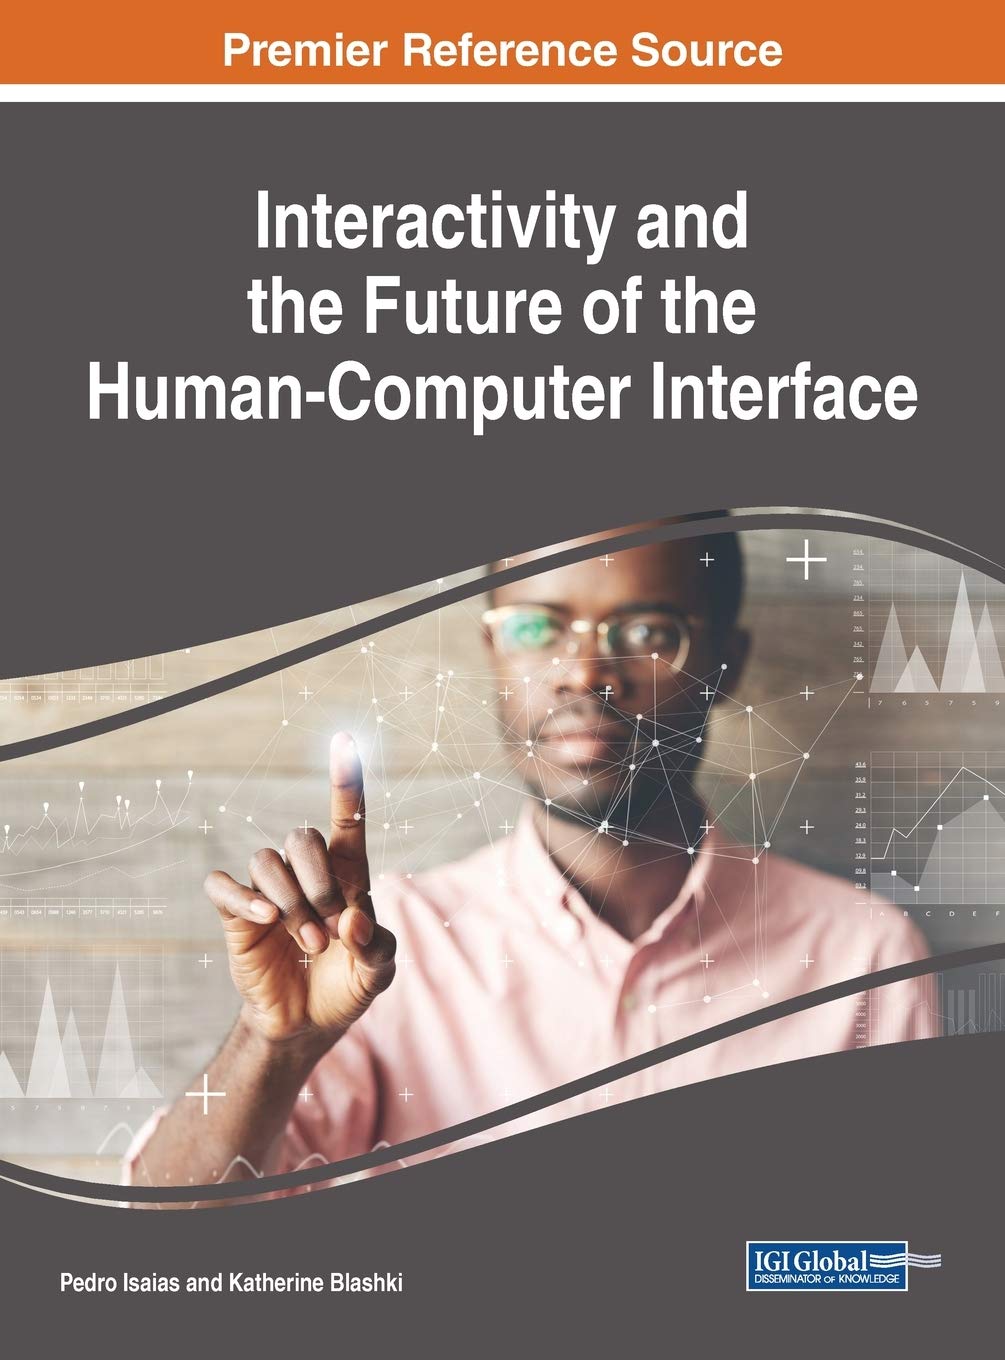 Interactivity and the Future of the Human-Computer Interface | Pedro Isaias